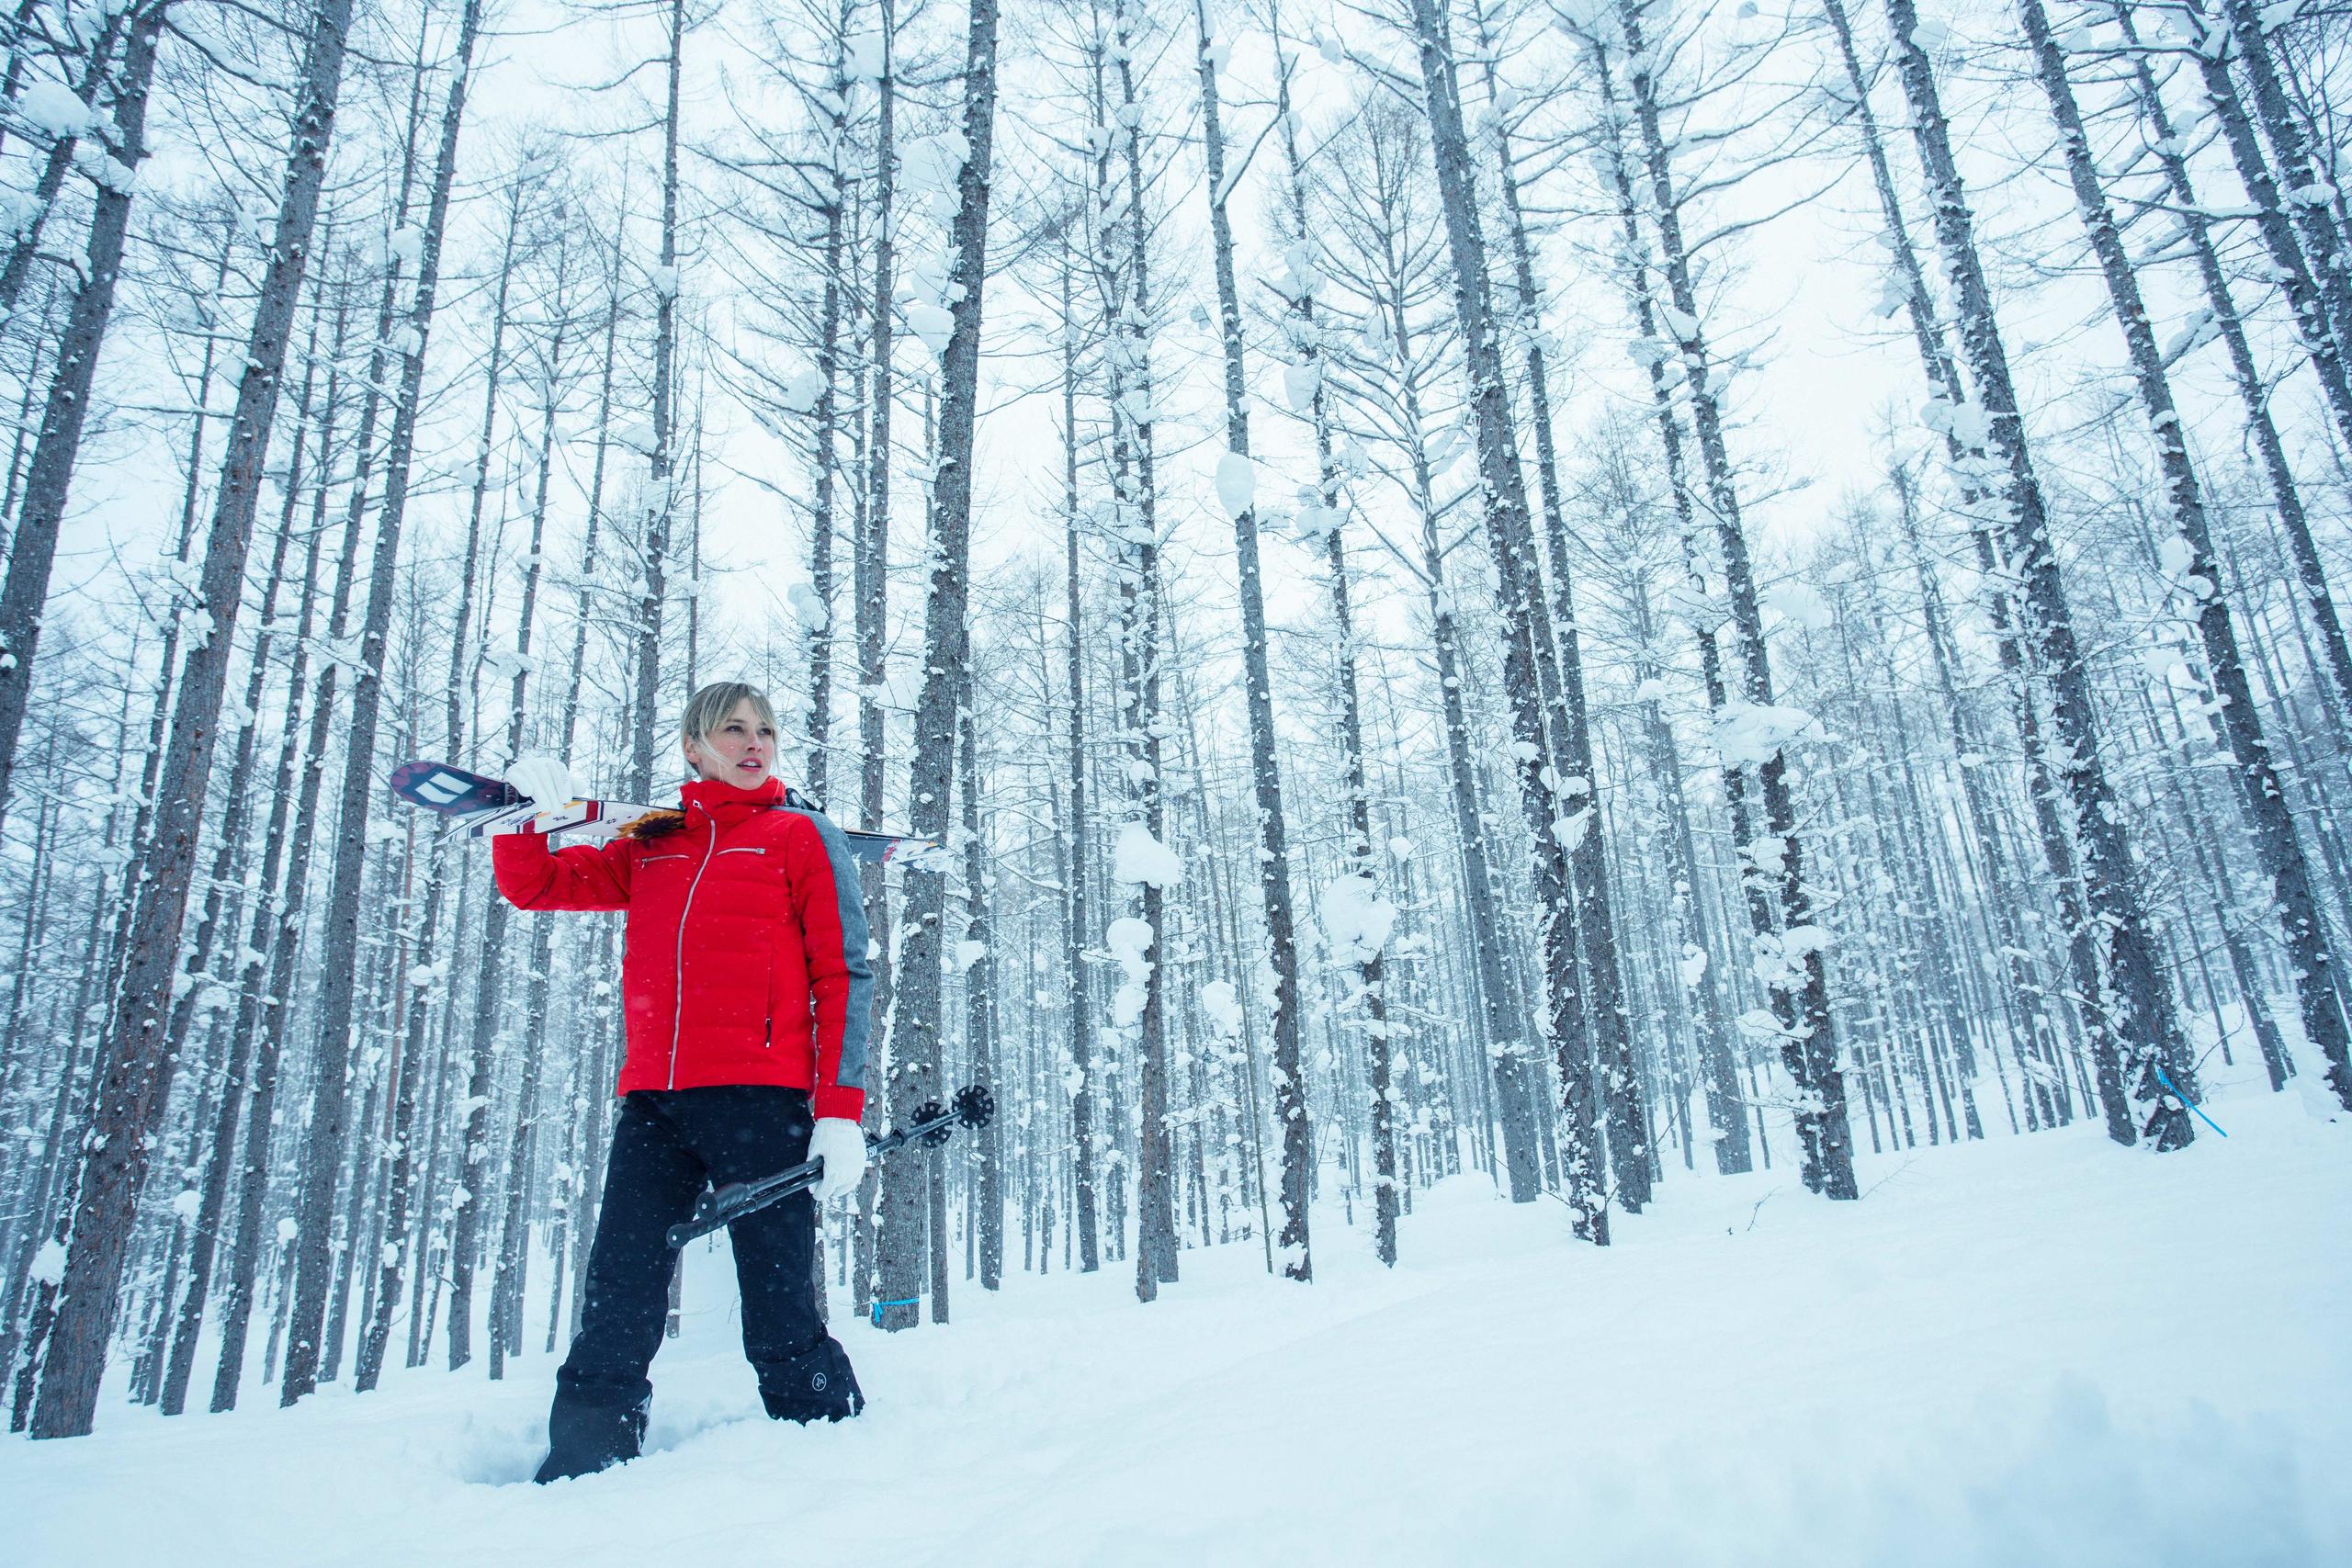 Woman holding skis in snowy forest in Hokkaido, Japan